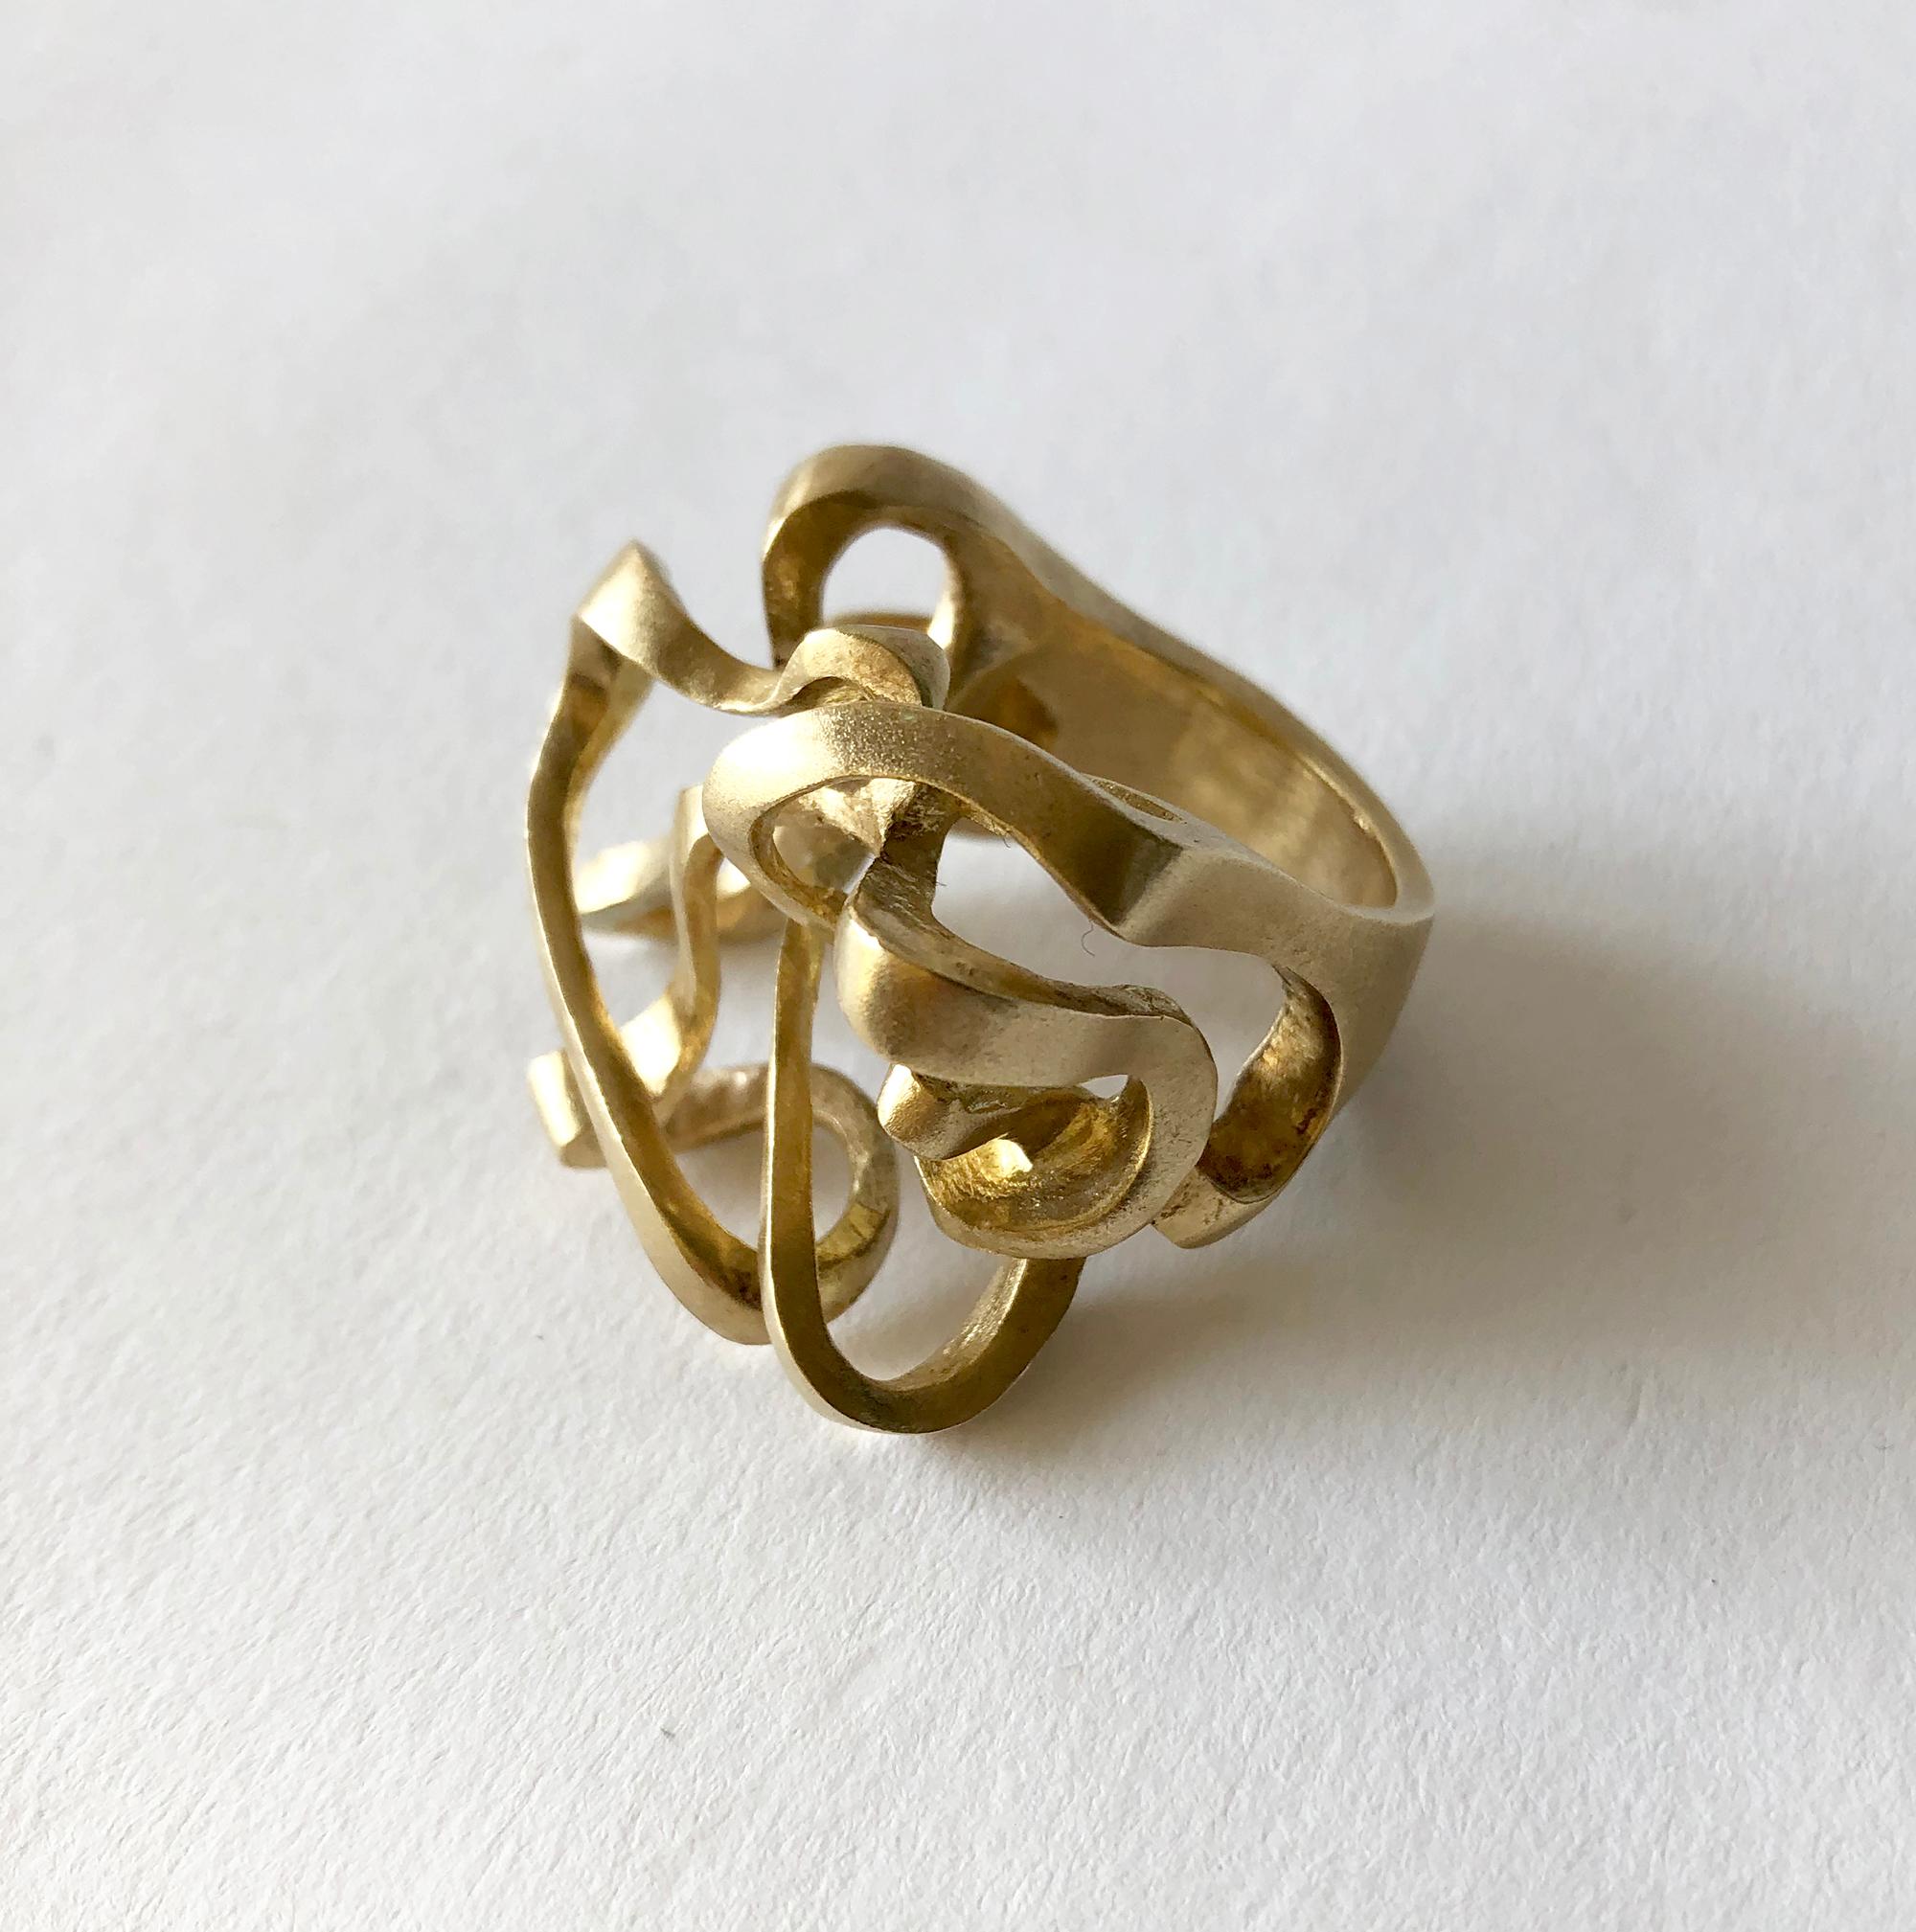 Postmodernist 14K gold sculptural ring created by Hans Appenzeller of Amsterdam, circa 2000. Ring is a finger size 7.75 - 8 and is signed with the 585 hallmark for gold content.  In very good vintage condition.  34.1 grams.


After his training at